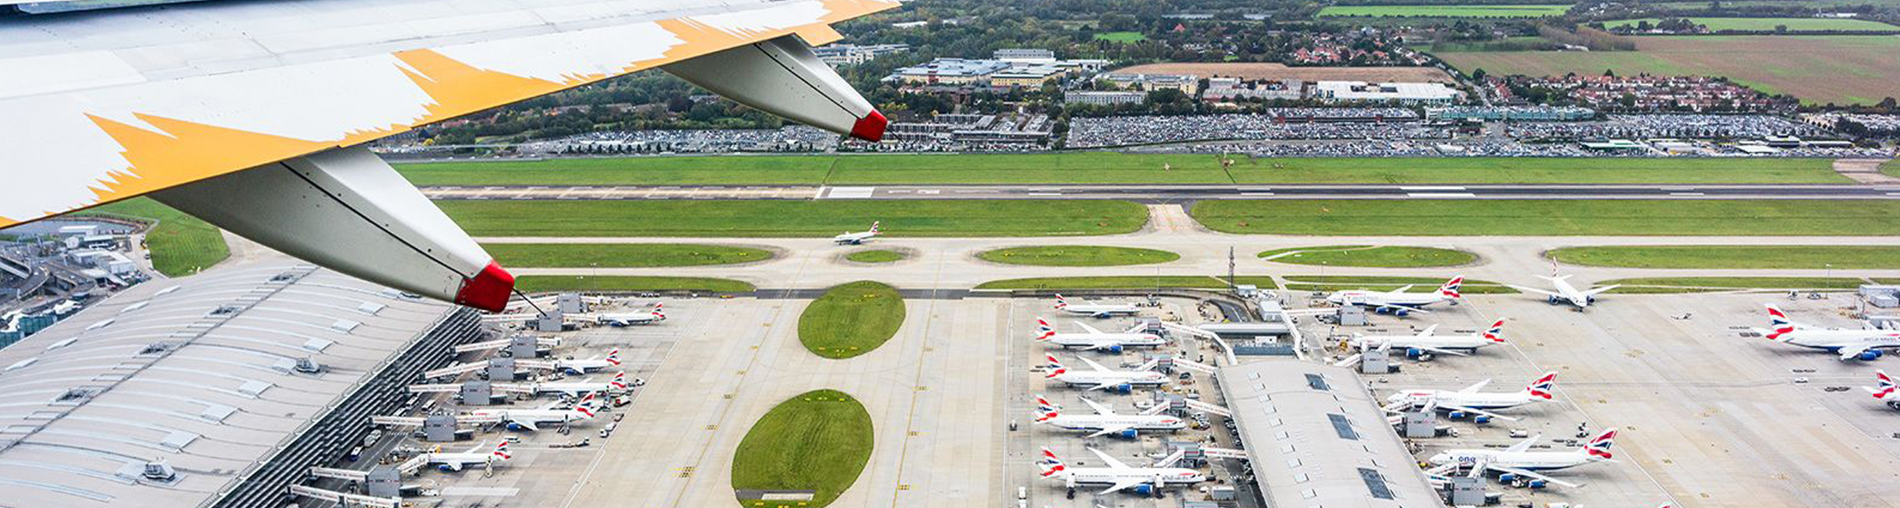 A Guide to London Heathrow Airport (LHR)